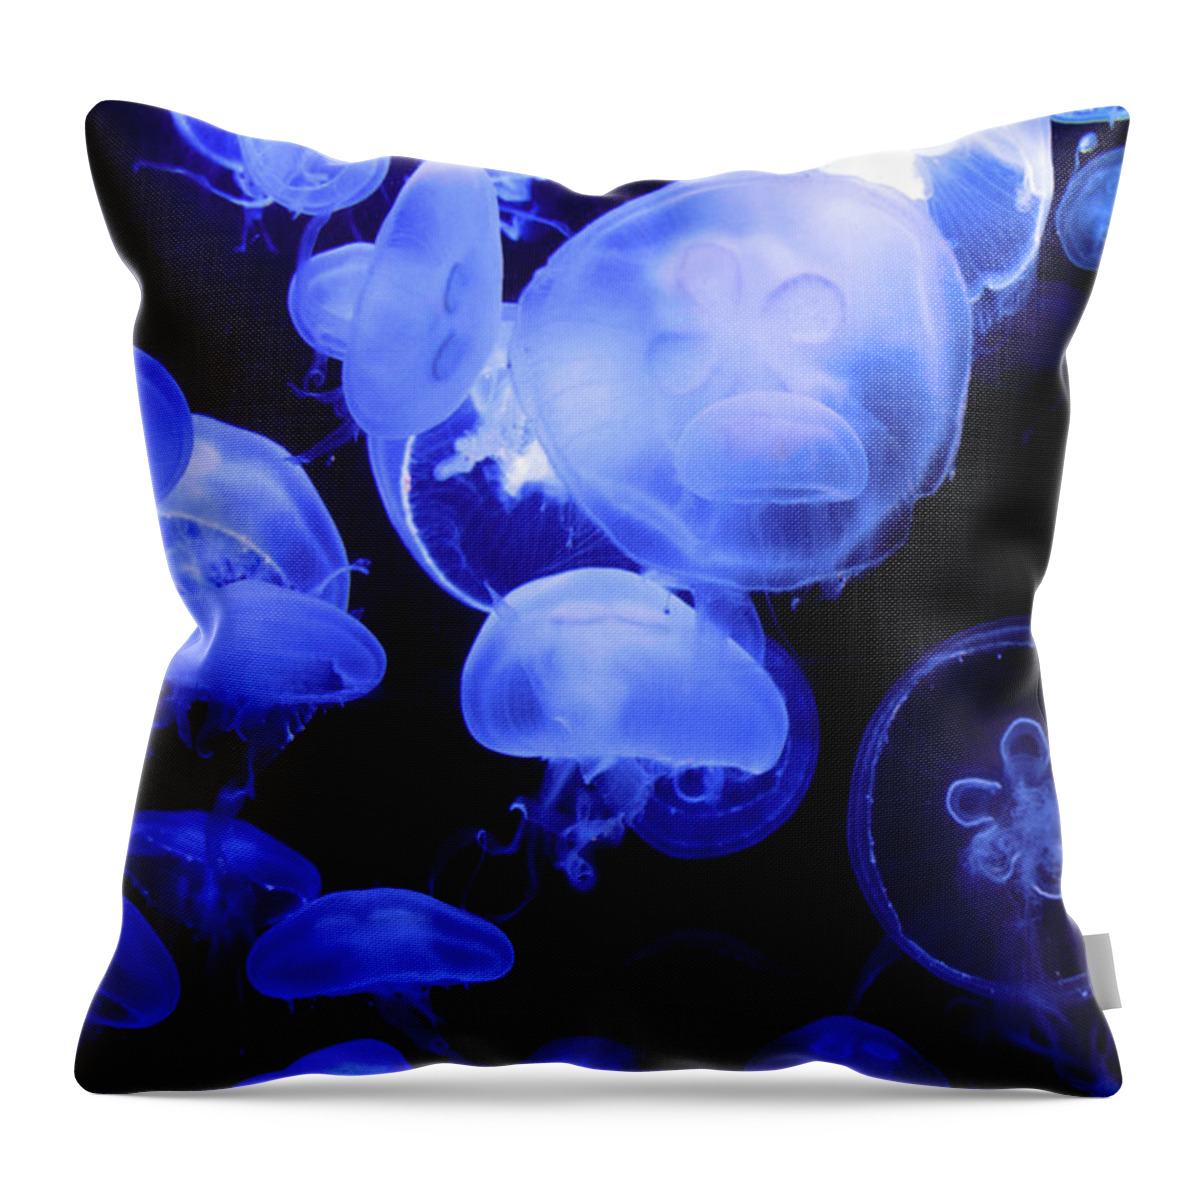 Jellyfish Throw Pillow featuring the photograph Alien by Mitch Cat